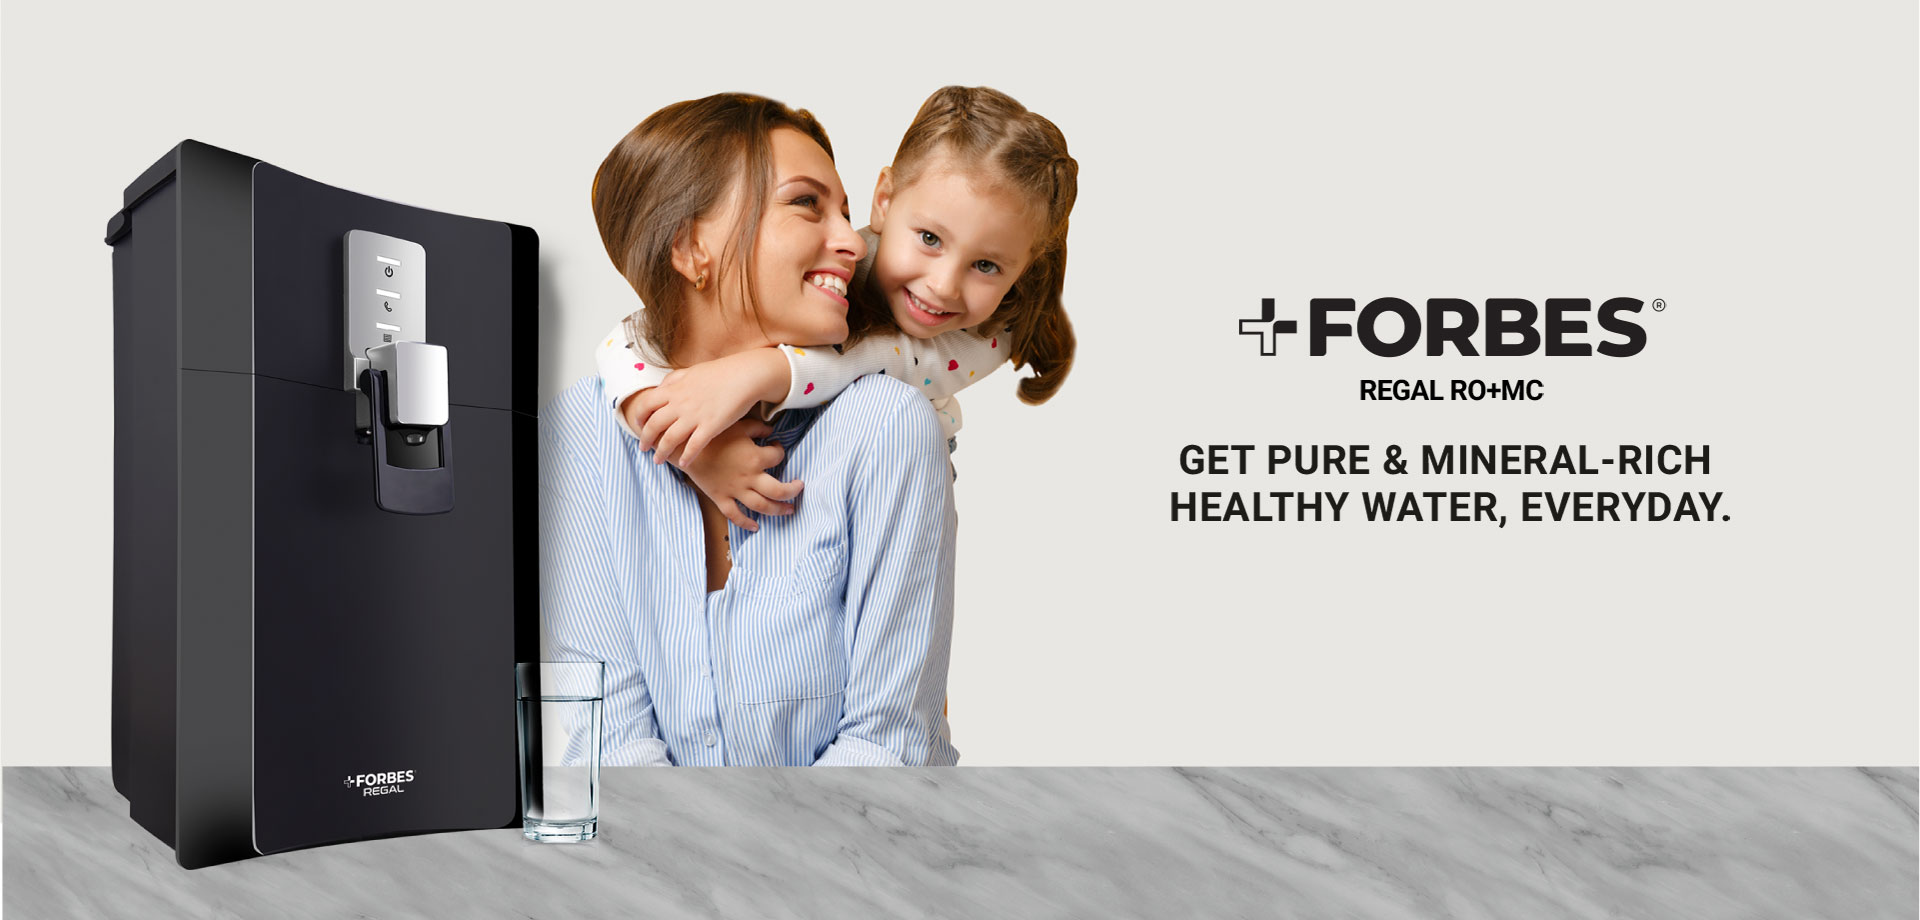 GET PURE & MINERAL-RICH HEALTHY WATER, EVERYDAY.